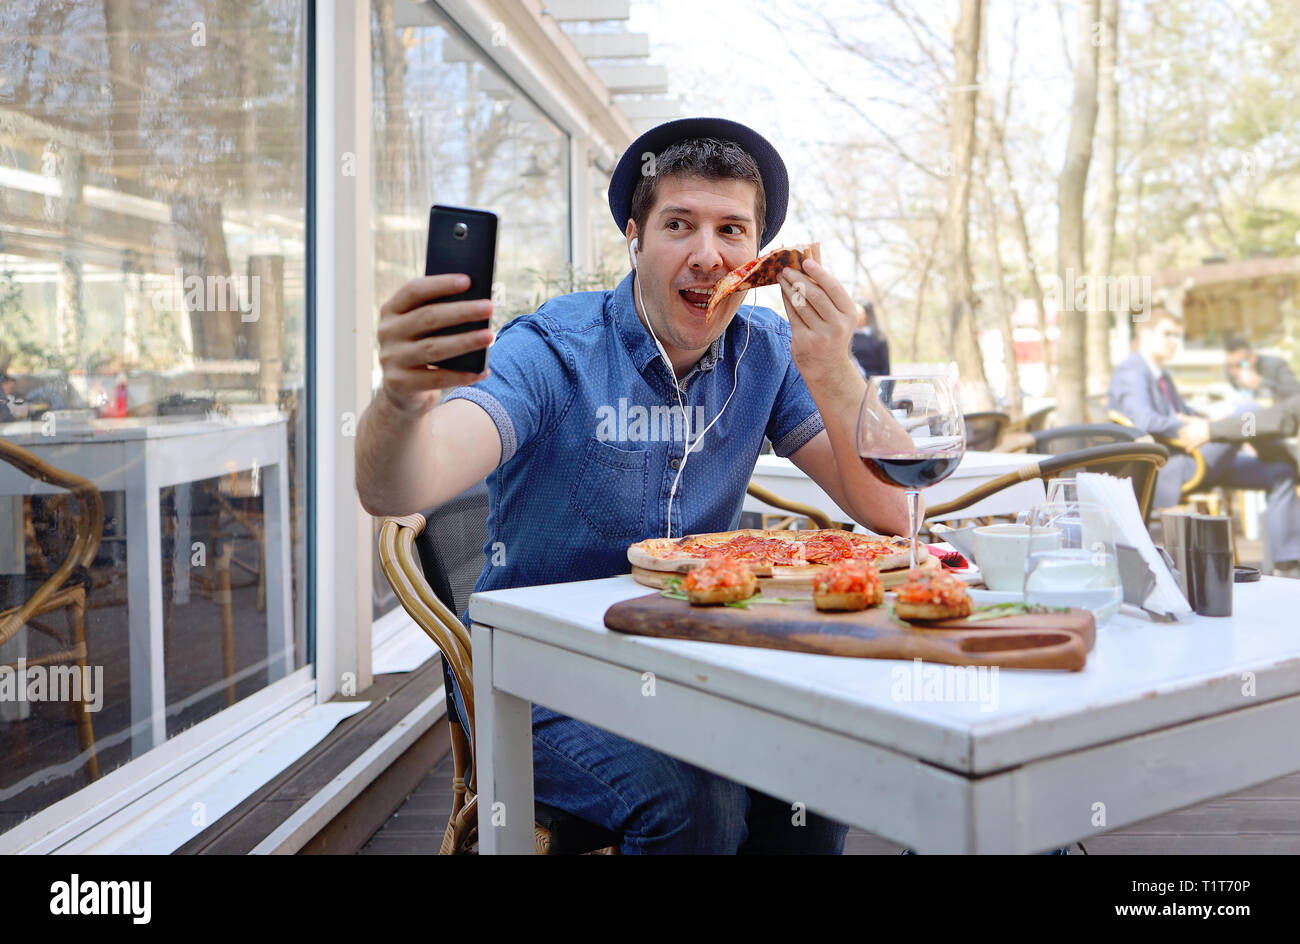 Handsome hunger man eating pizza and showing off in a video conference with his friends. Traveler abroad and free roaming concept. Stock Photo